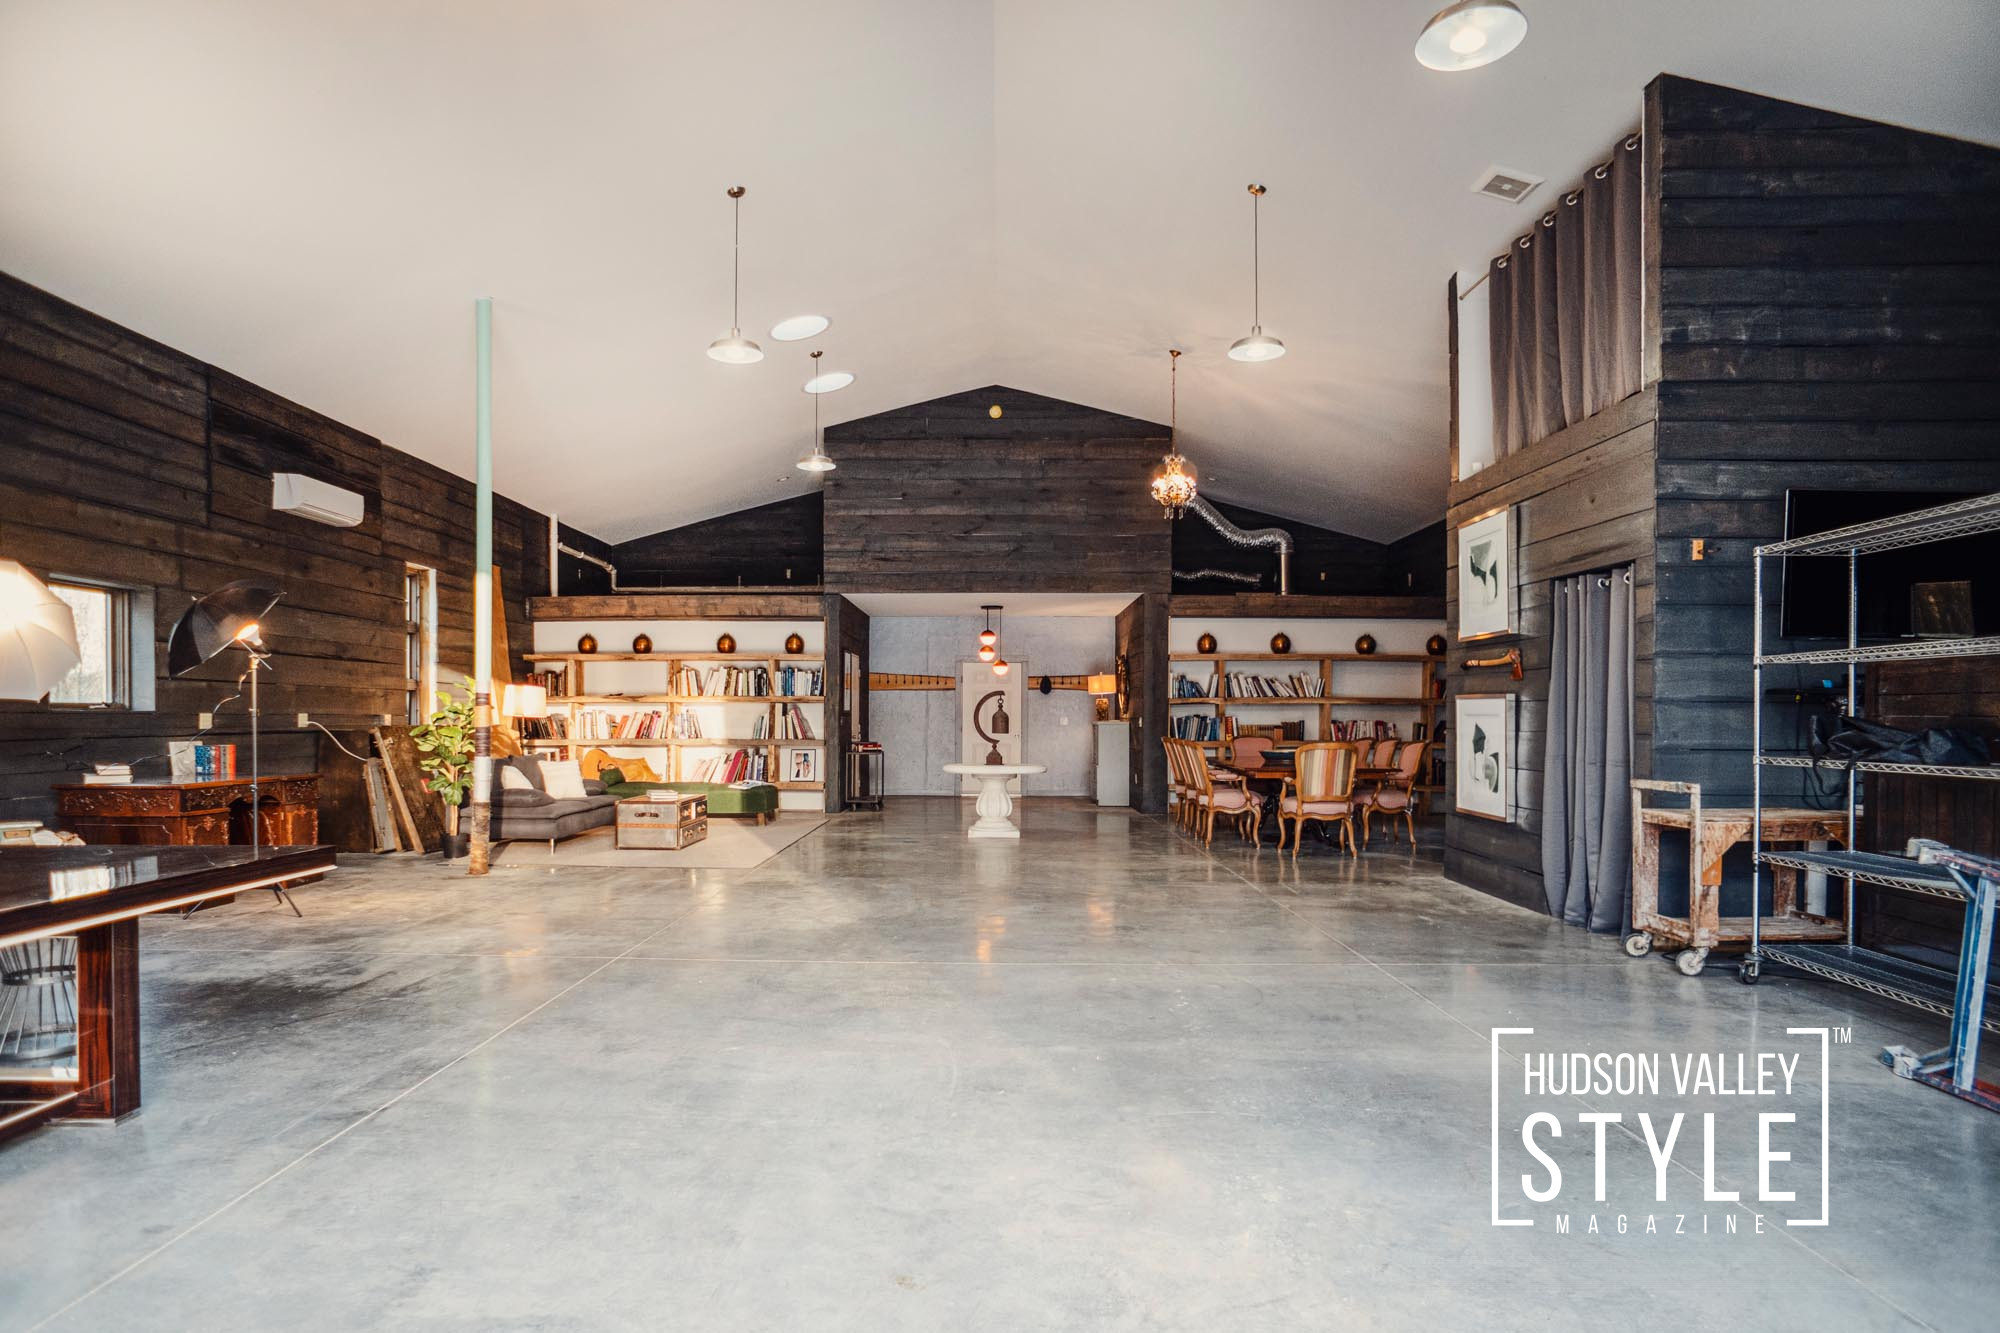 The Top 10 Reasons Why You Should Move To Upstate New York – Presented by Duncan Avenue Studios / ALLUVION MEDIA – Hudson Valley and Catskills Real Estate + Airbnb Photography by Maxwell Alexander